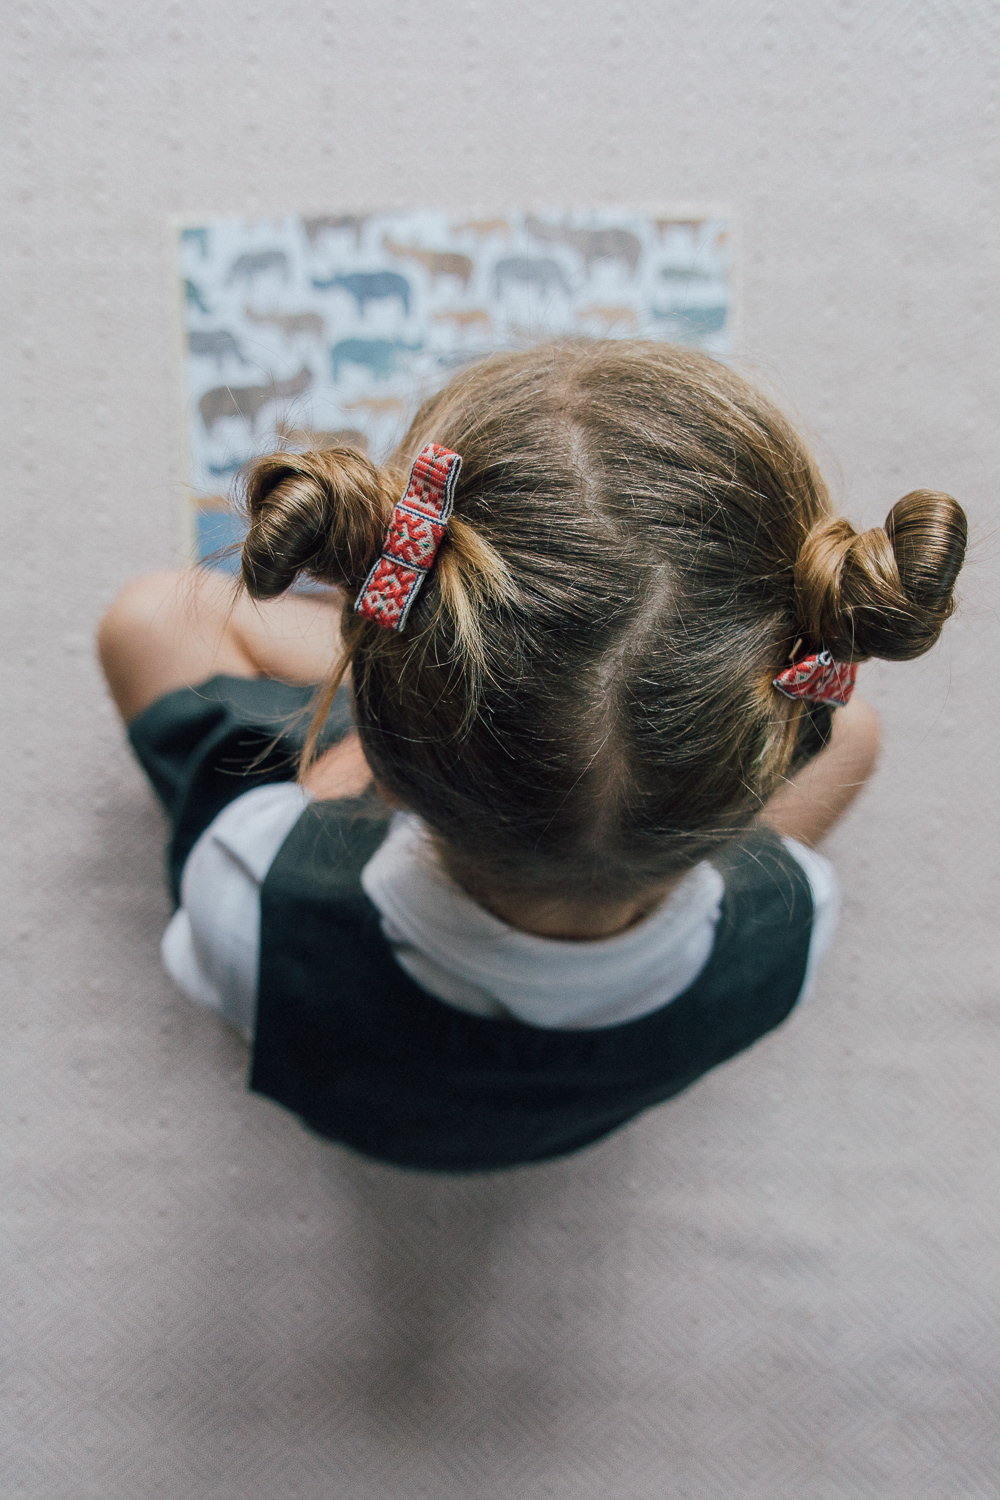 Grey Pinafore Dress & White Polo Shirt | Reading | ABC | Bunches | Story Time | Homework | Back To School | Preparing For The School Term With Tesco School Uniform